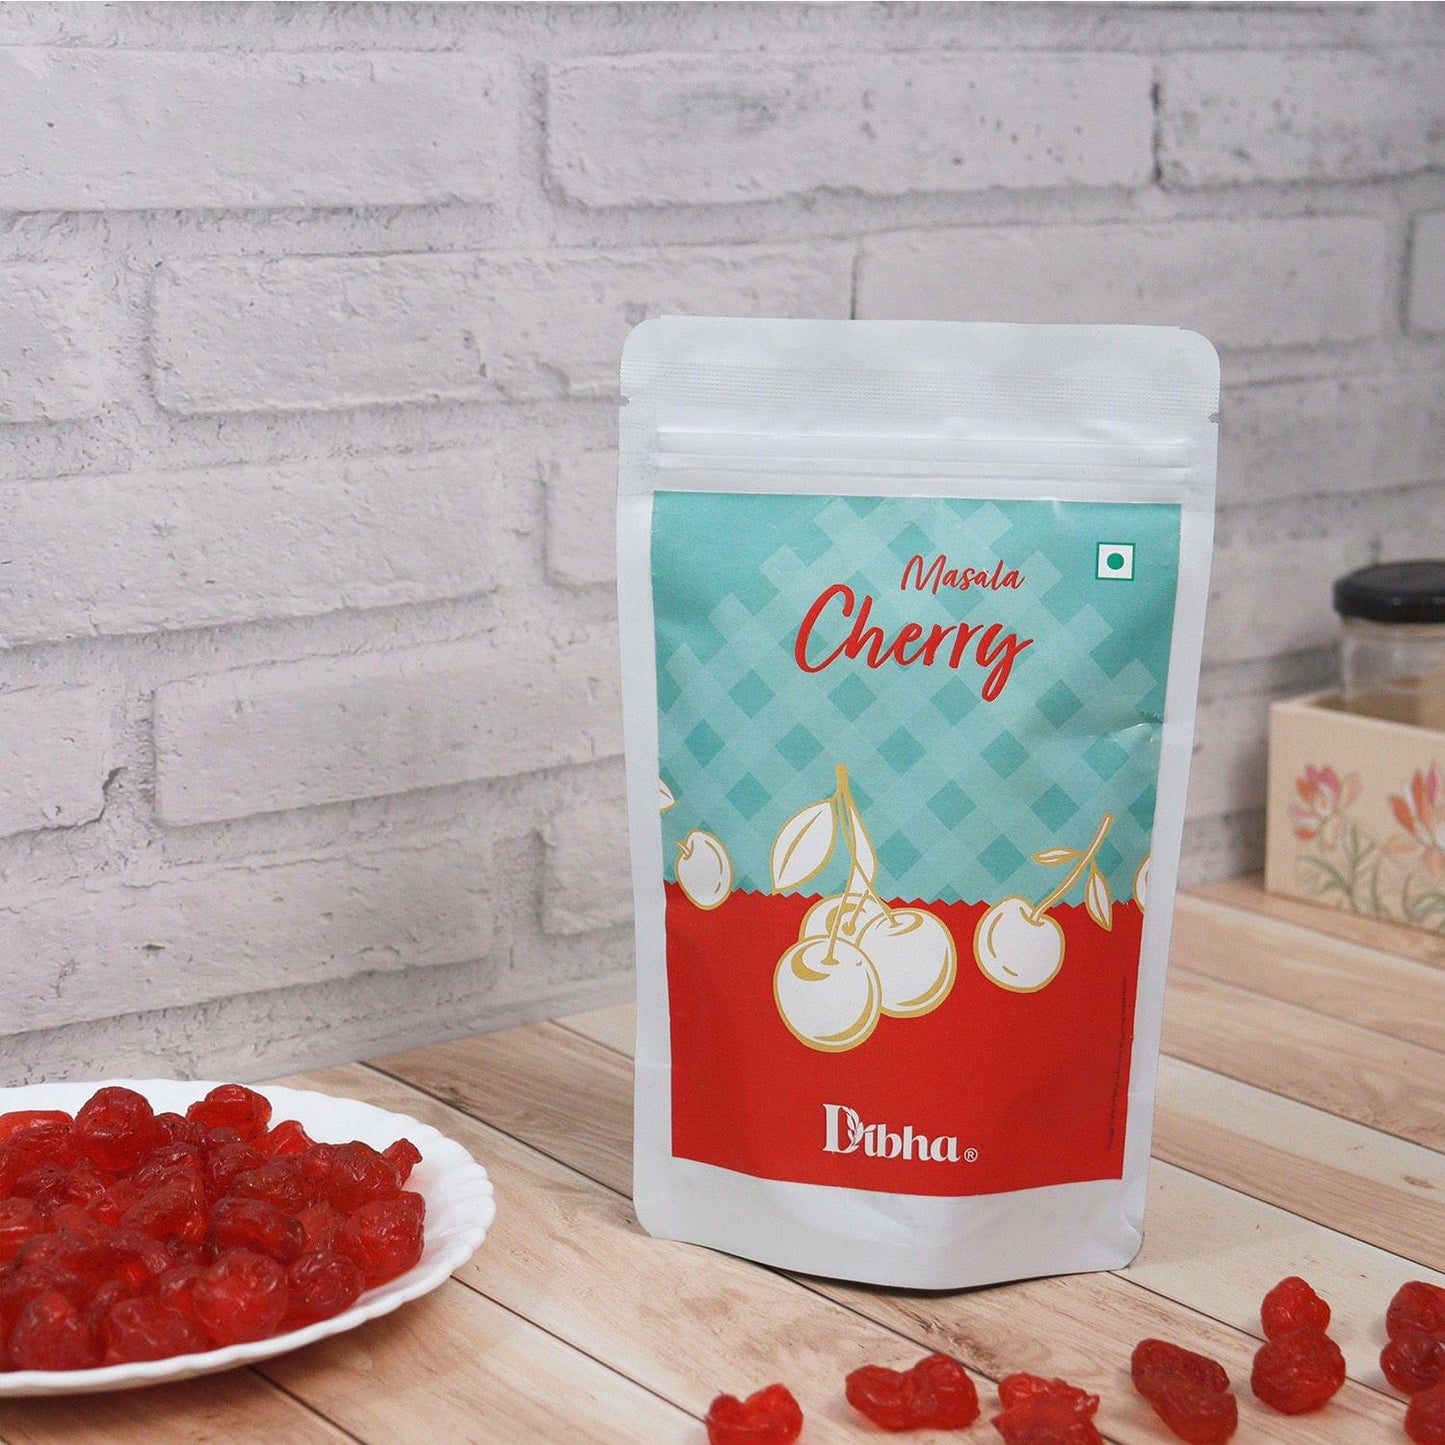 DIBHA - HONEST SNACKING Masala Cherry 200g (Chatpata Cherry Healthy Snack, Dehydrated Fruits, Delicious & Dried)